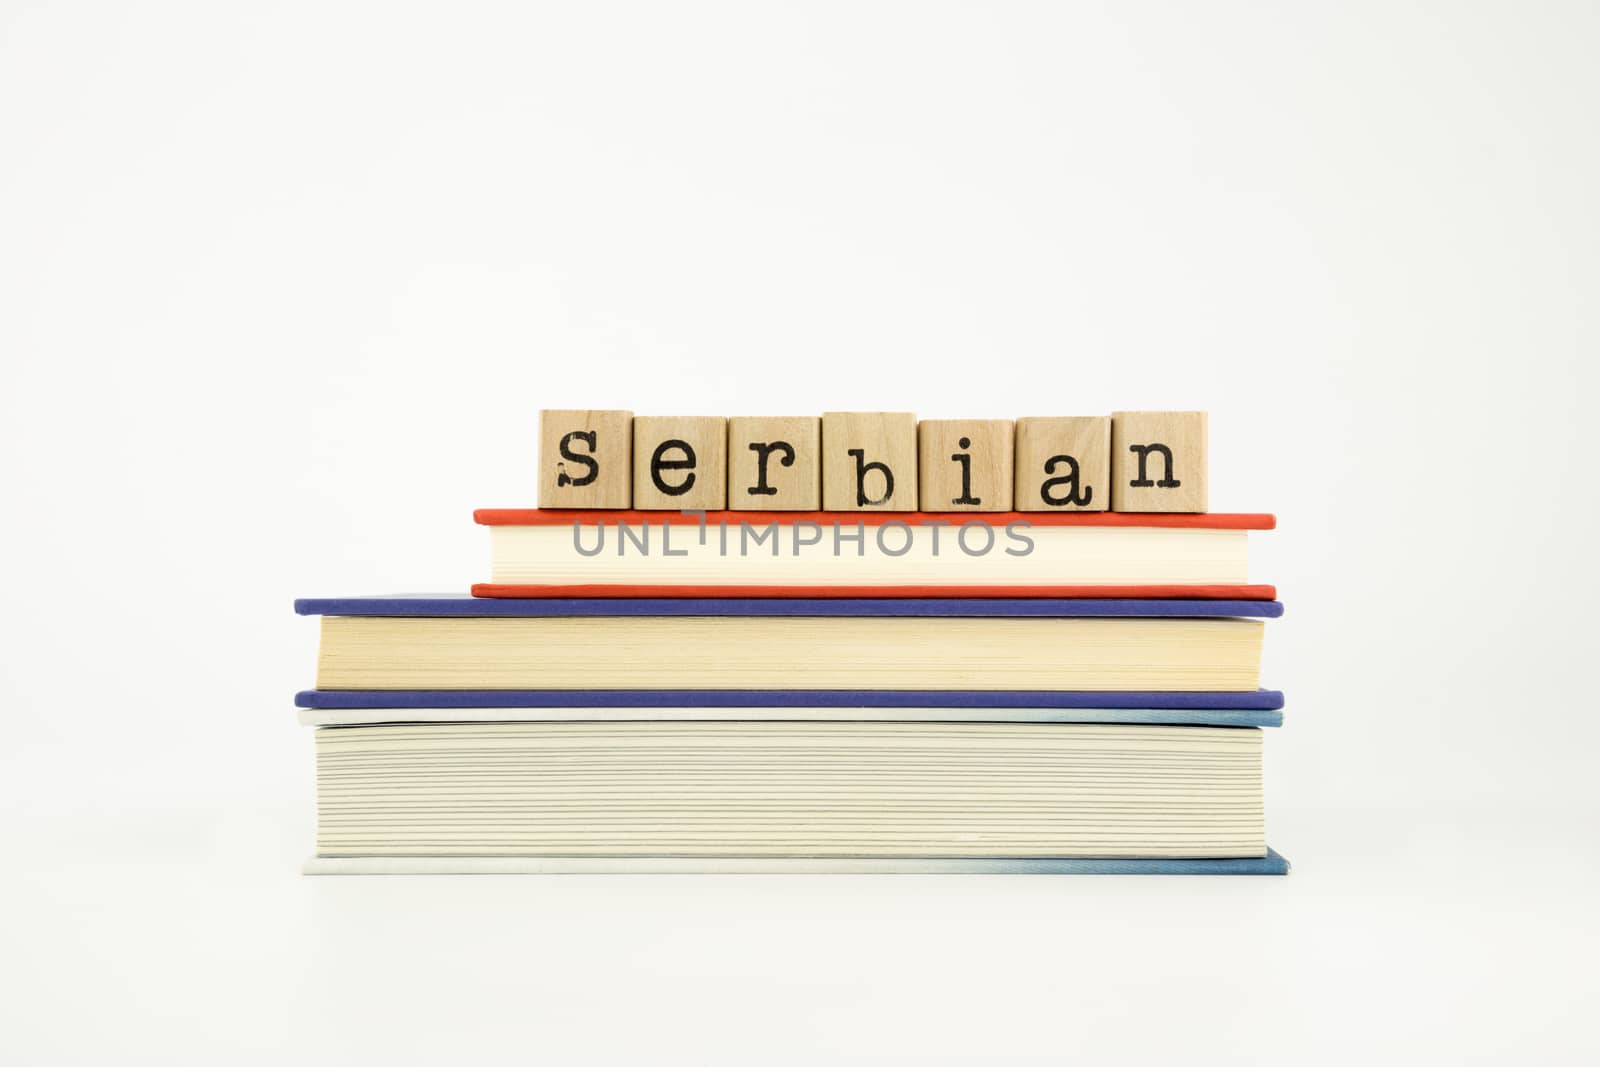 serbian language word on wood stamps and books by vinnstock